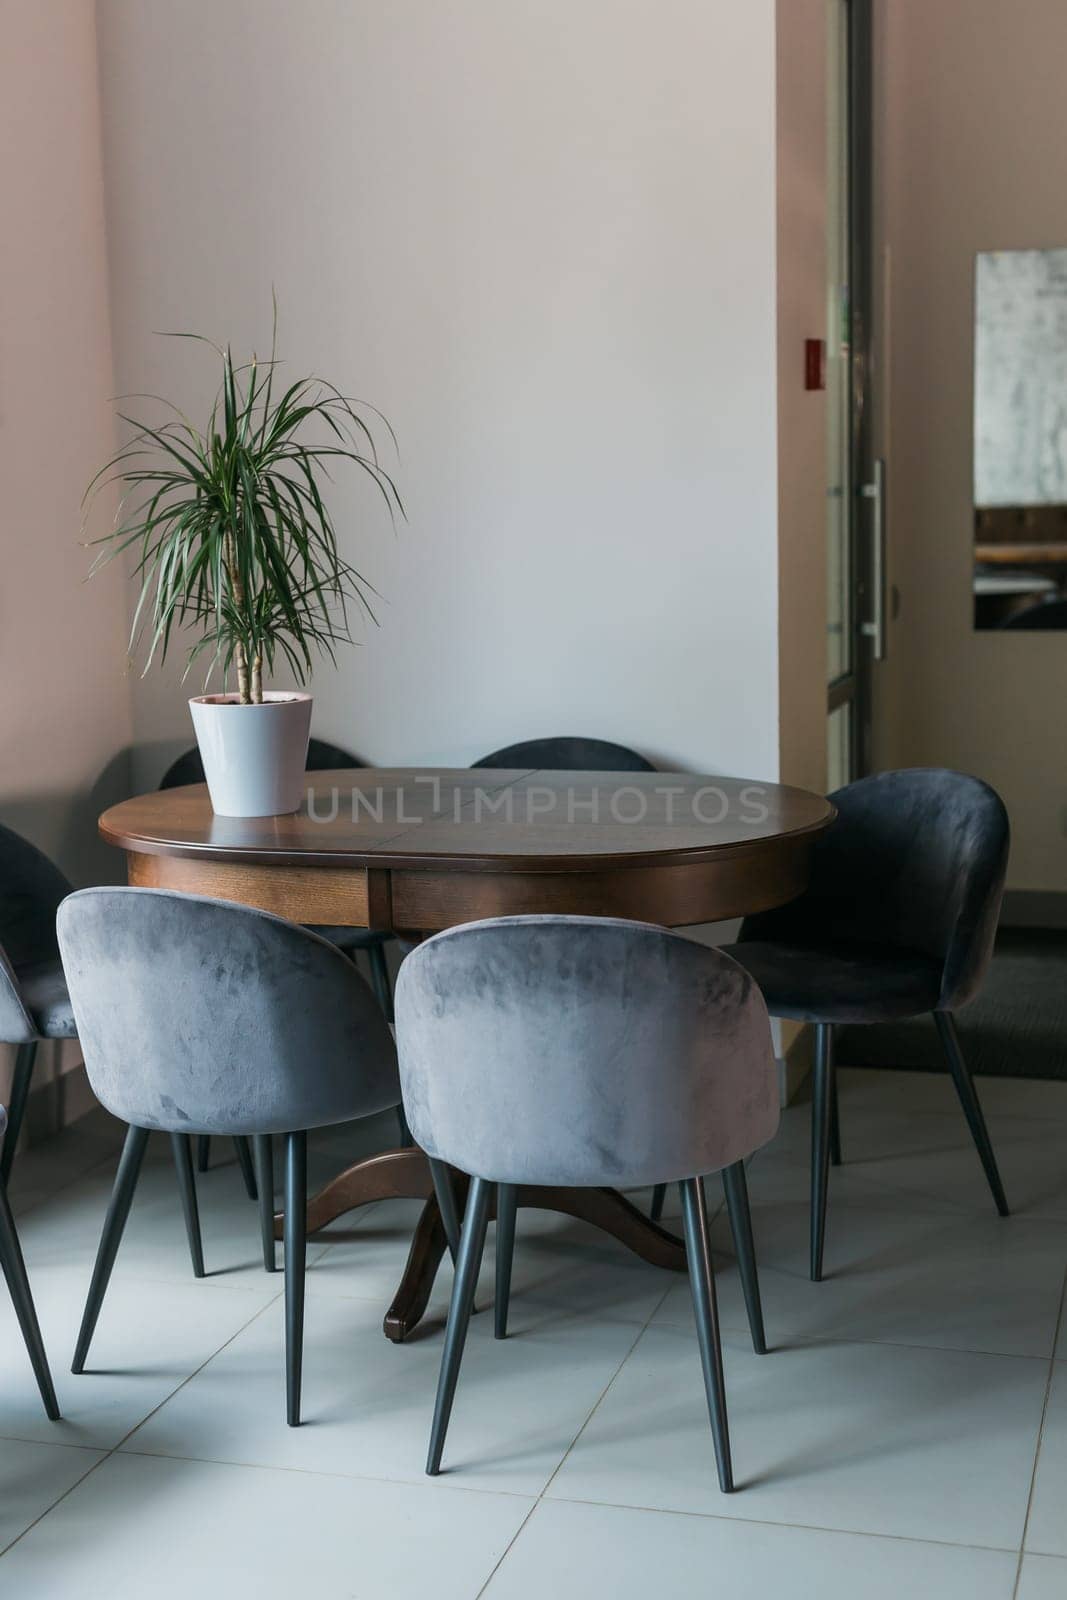 Grey chairs at wooden table and green plant in pot in minimalist cafe interior with poster and window by Satura86